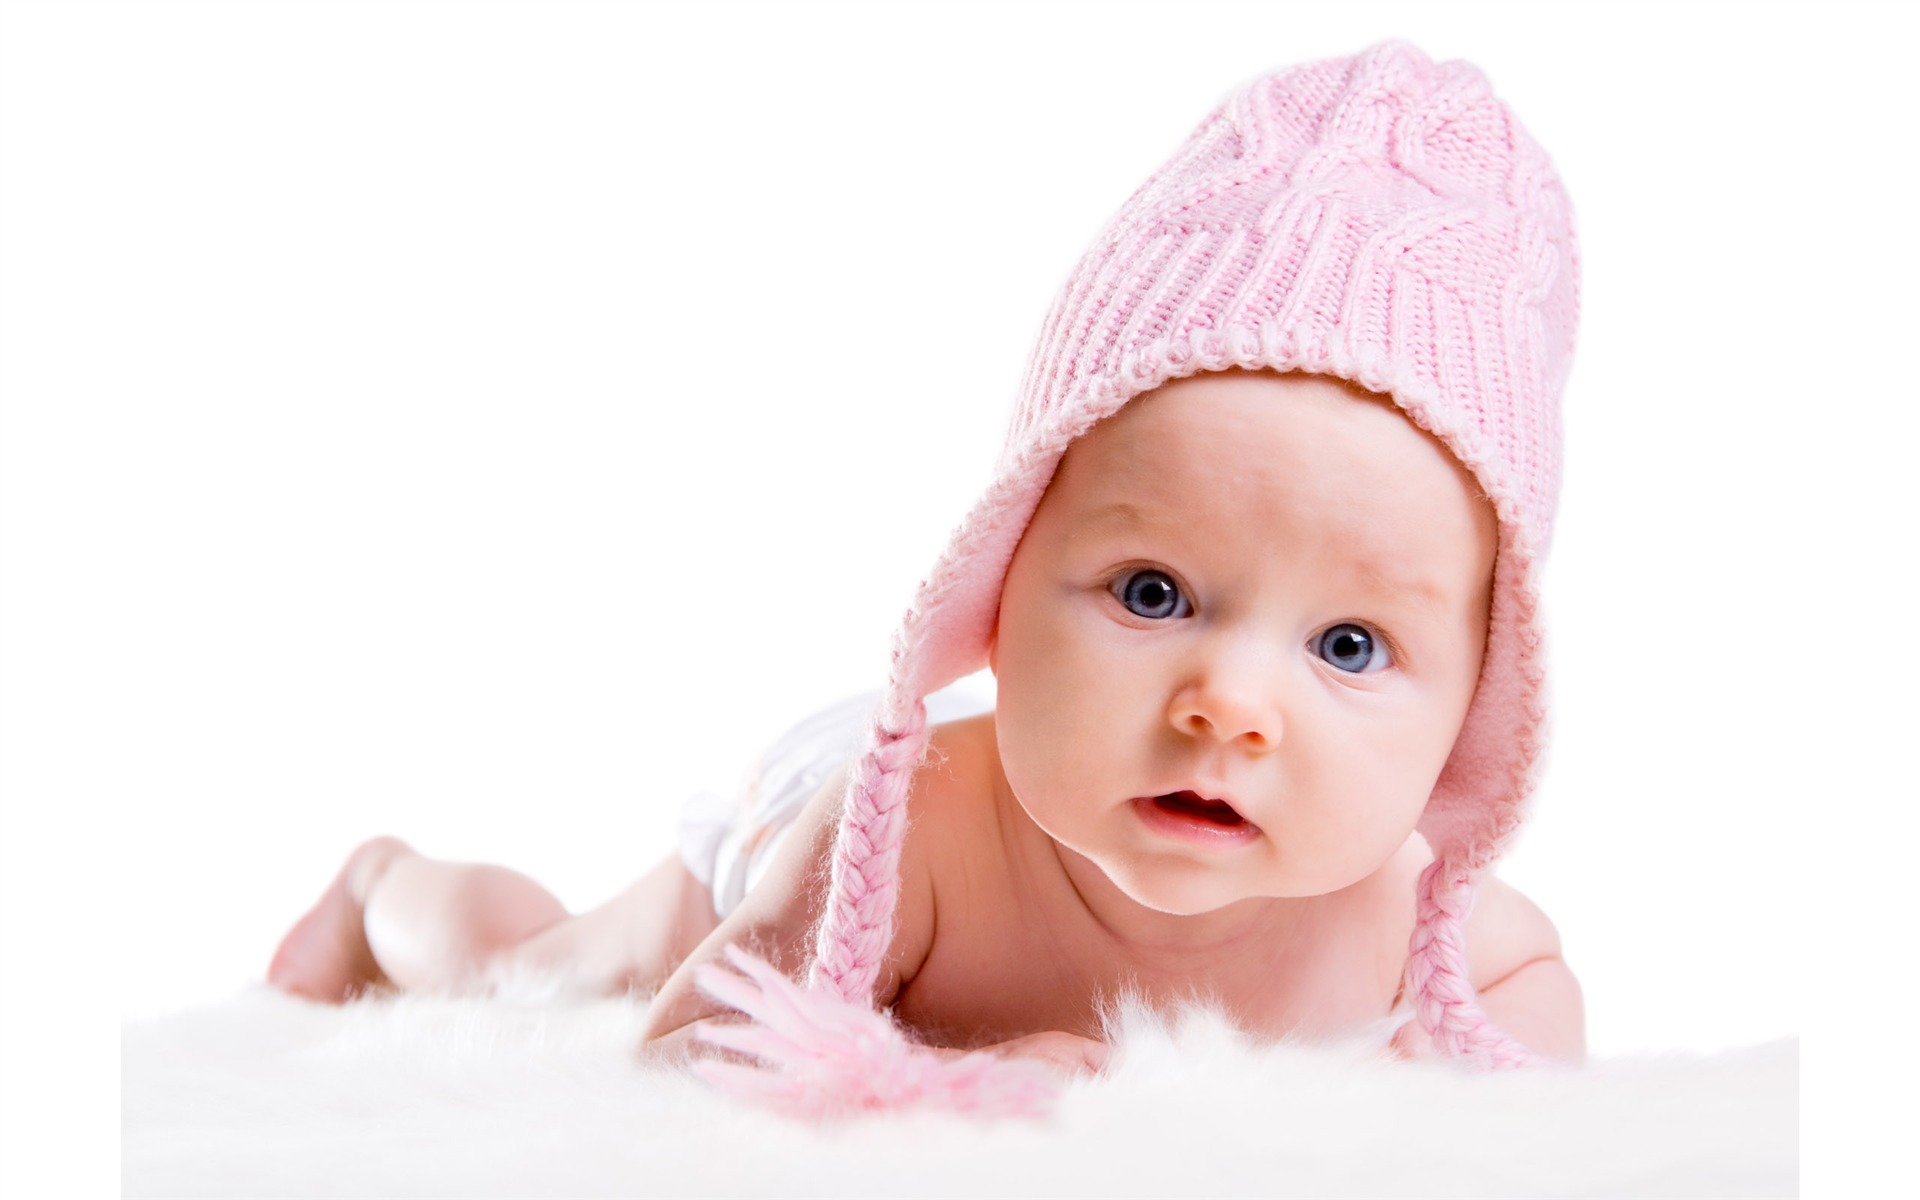 Cute Baby Wallpapers (4) #11 - 1920x1200